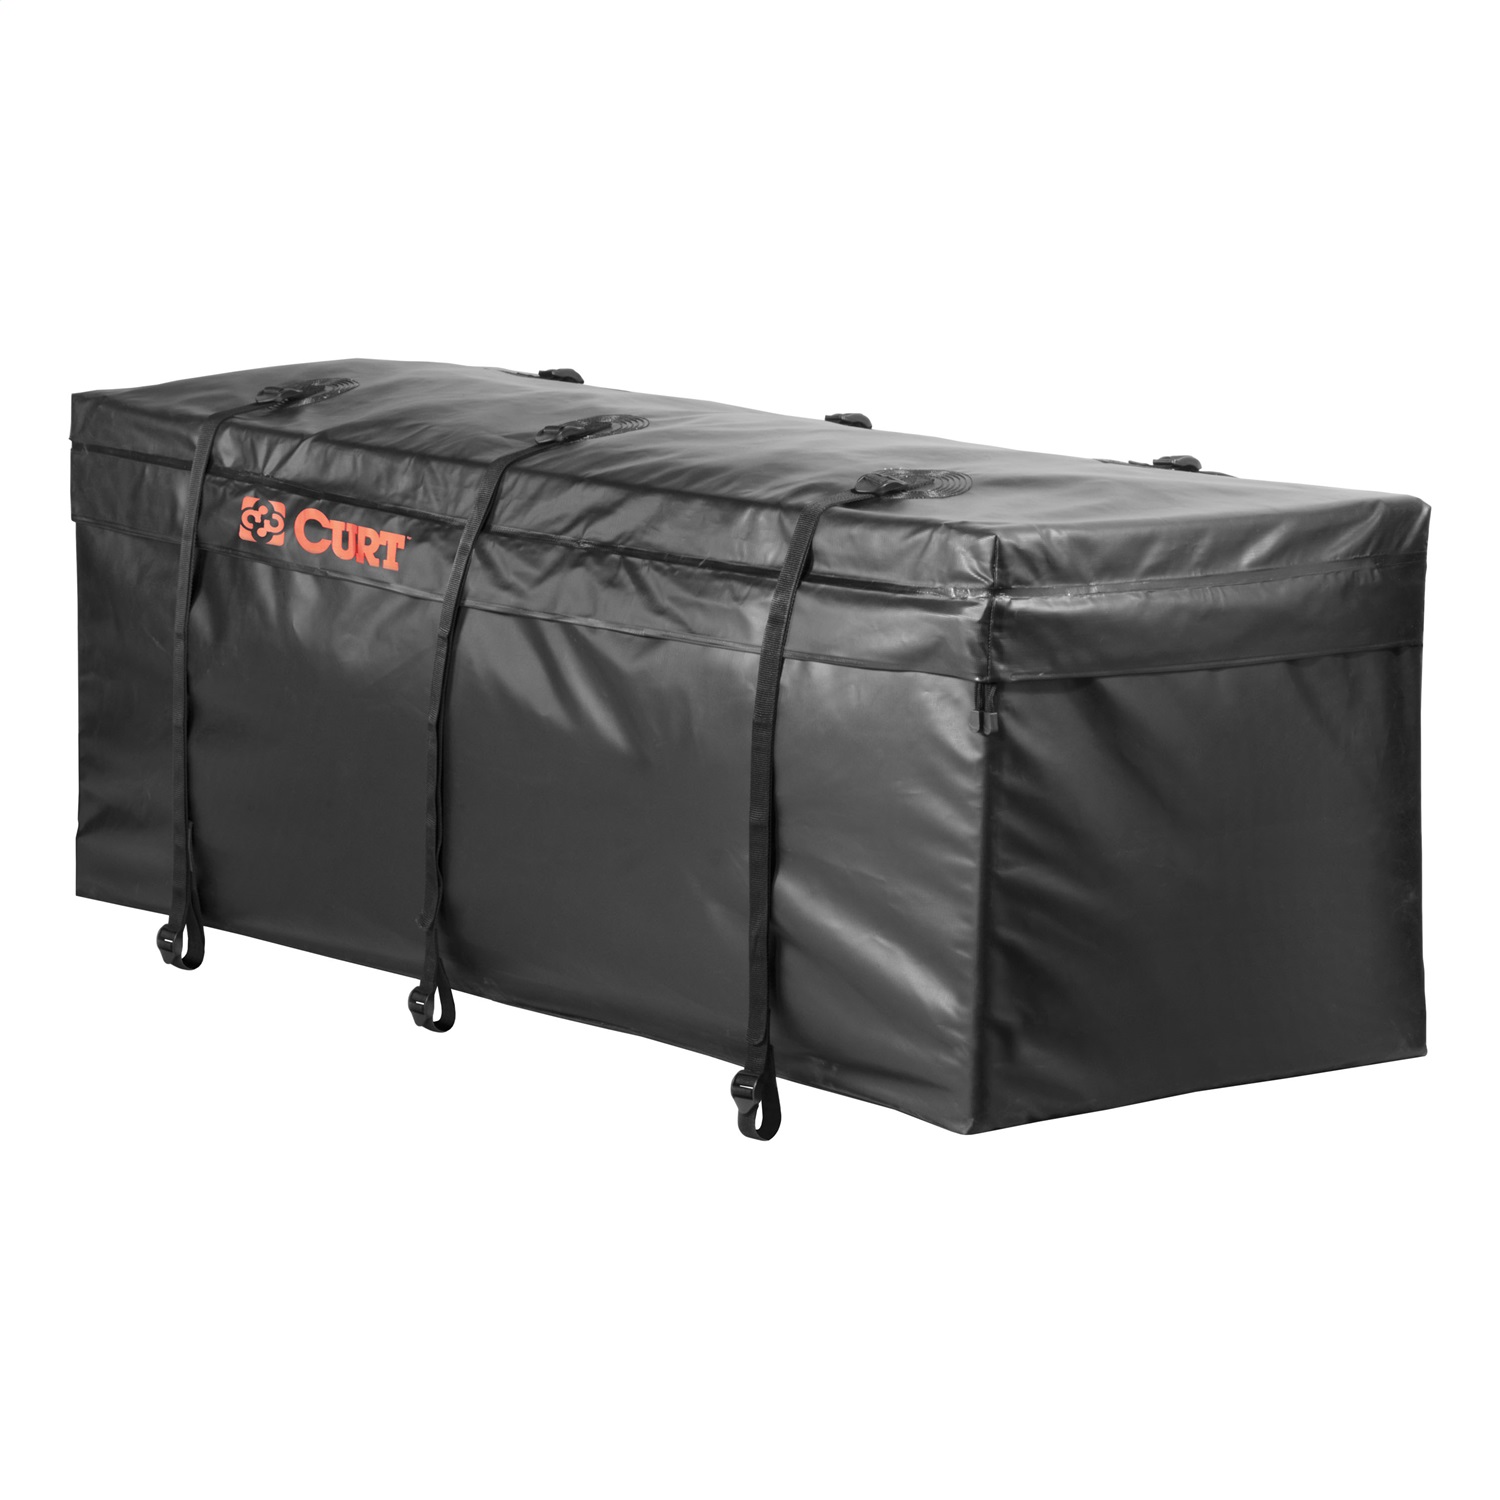 CURT Manufacturing CURT Manufacturing 18210 Waterproof Cargo Carrier Bag  Fits